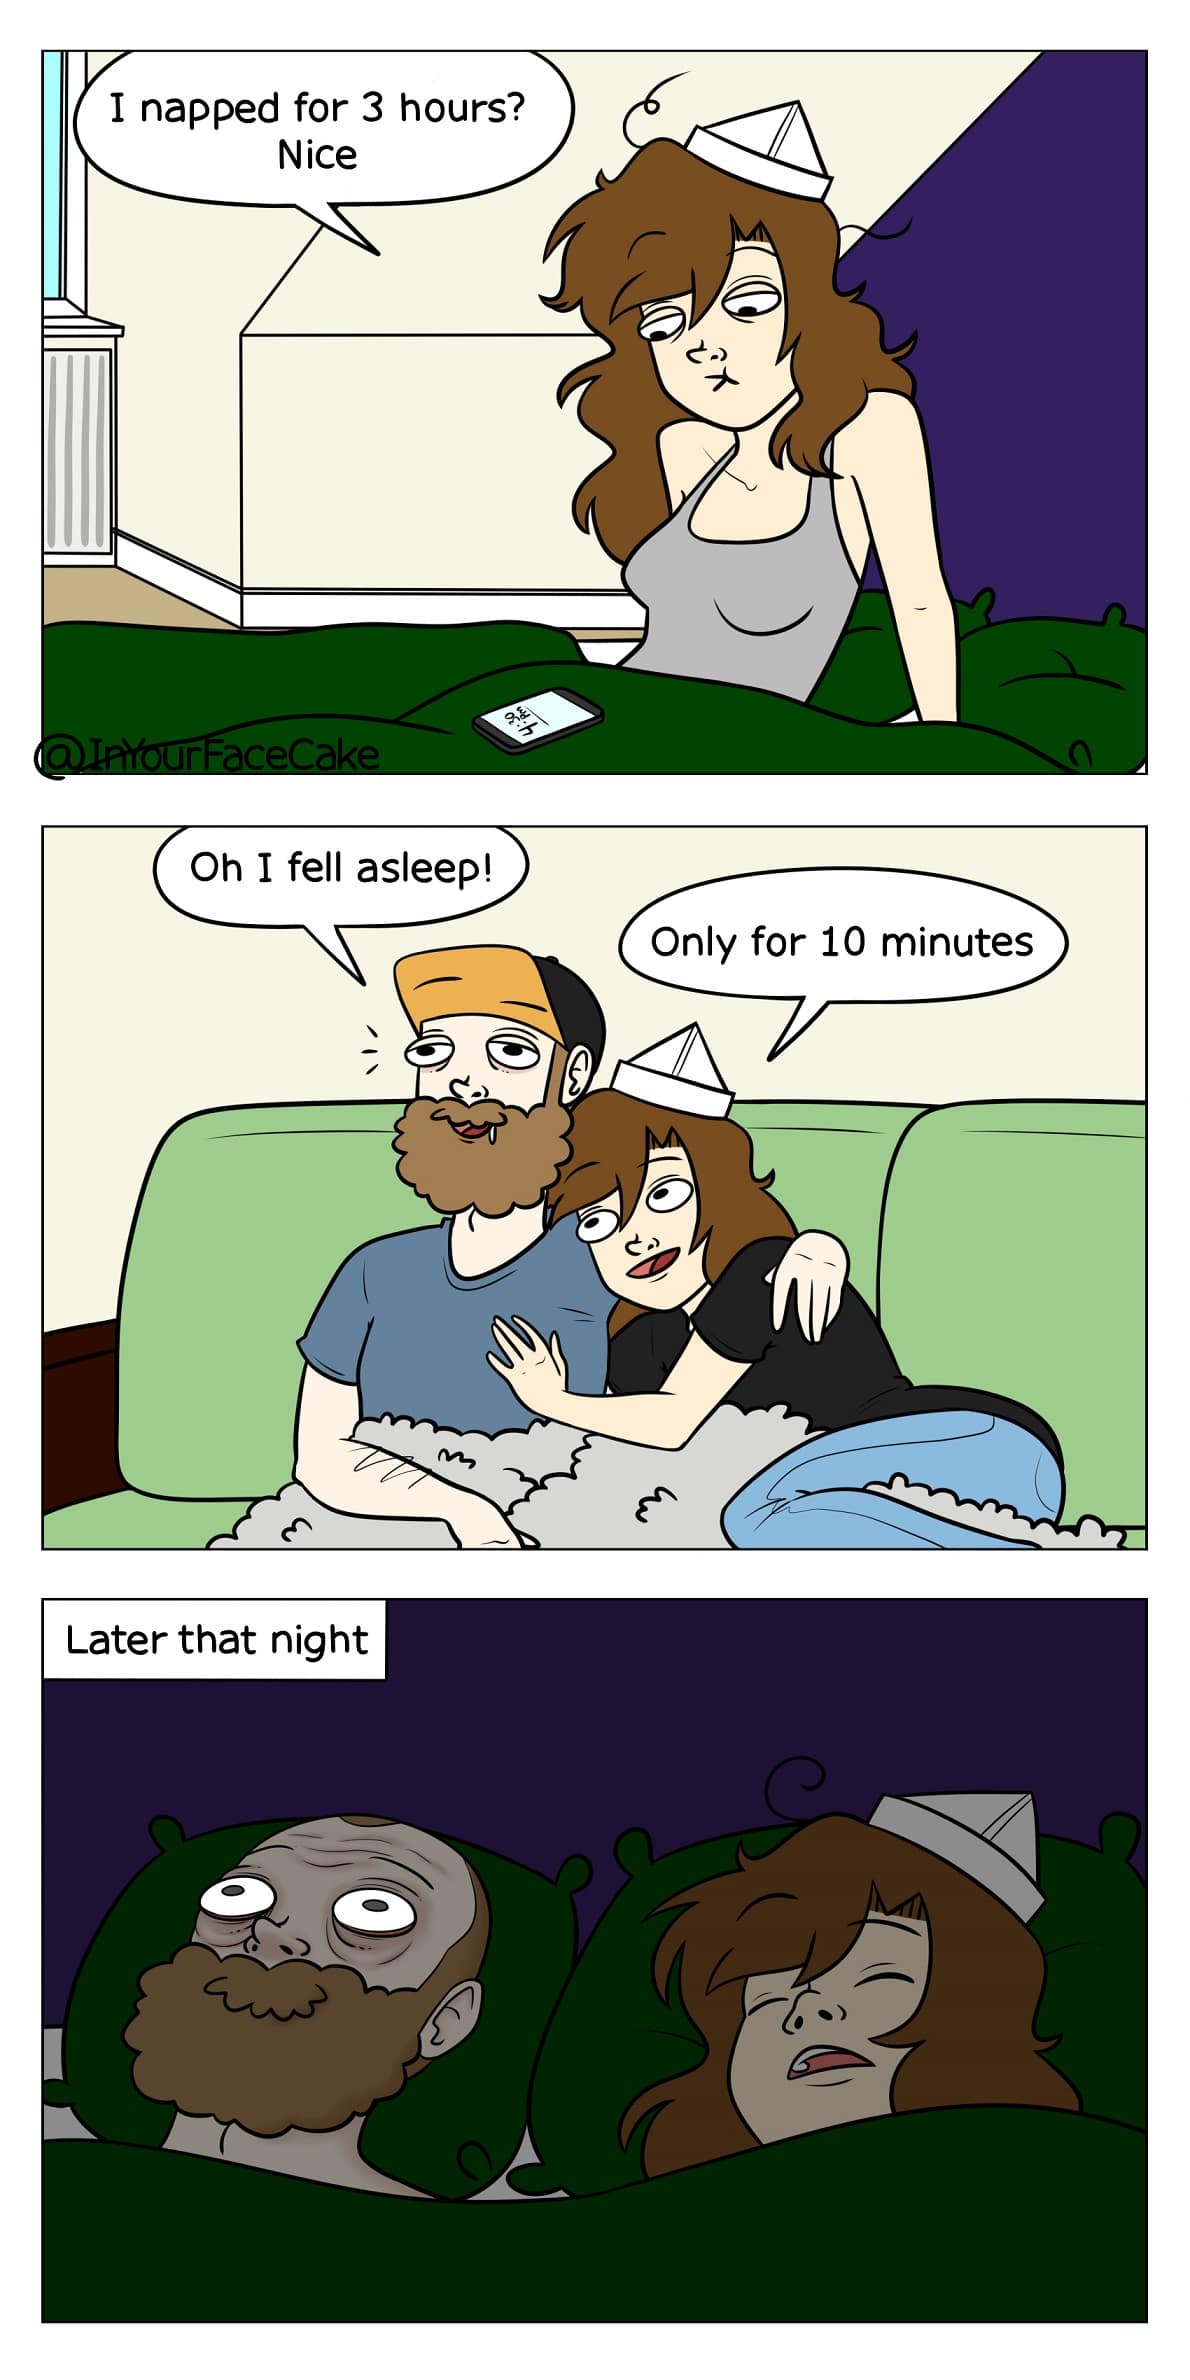 Two kinds of people (from inyourfacecake), InYourFaceCake Comics Two kinds of people (from inyourfacecake), InYourFaceCake text: I napped for 3 hours? Nice Oh I fell asleep! Only for 10 minutes Later that night 